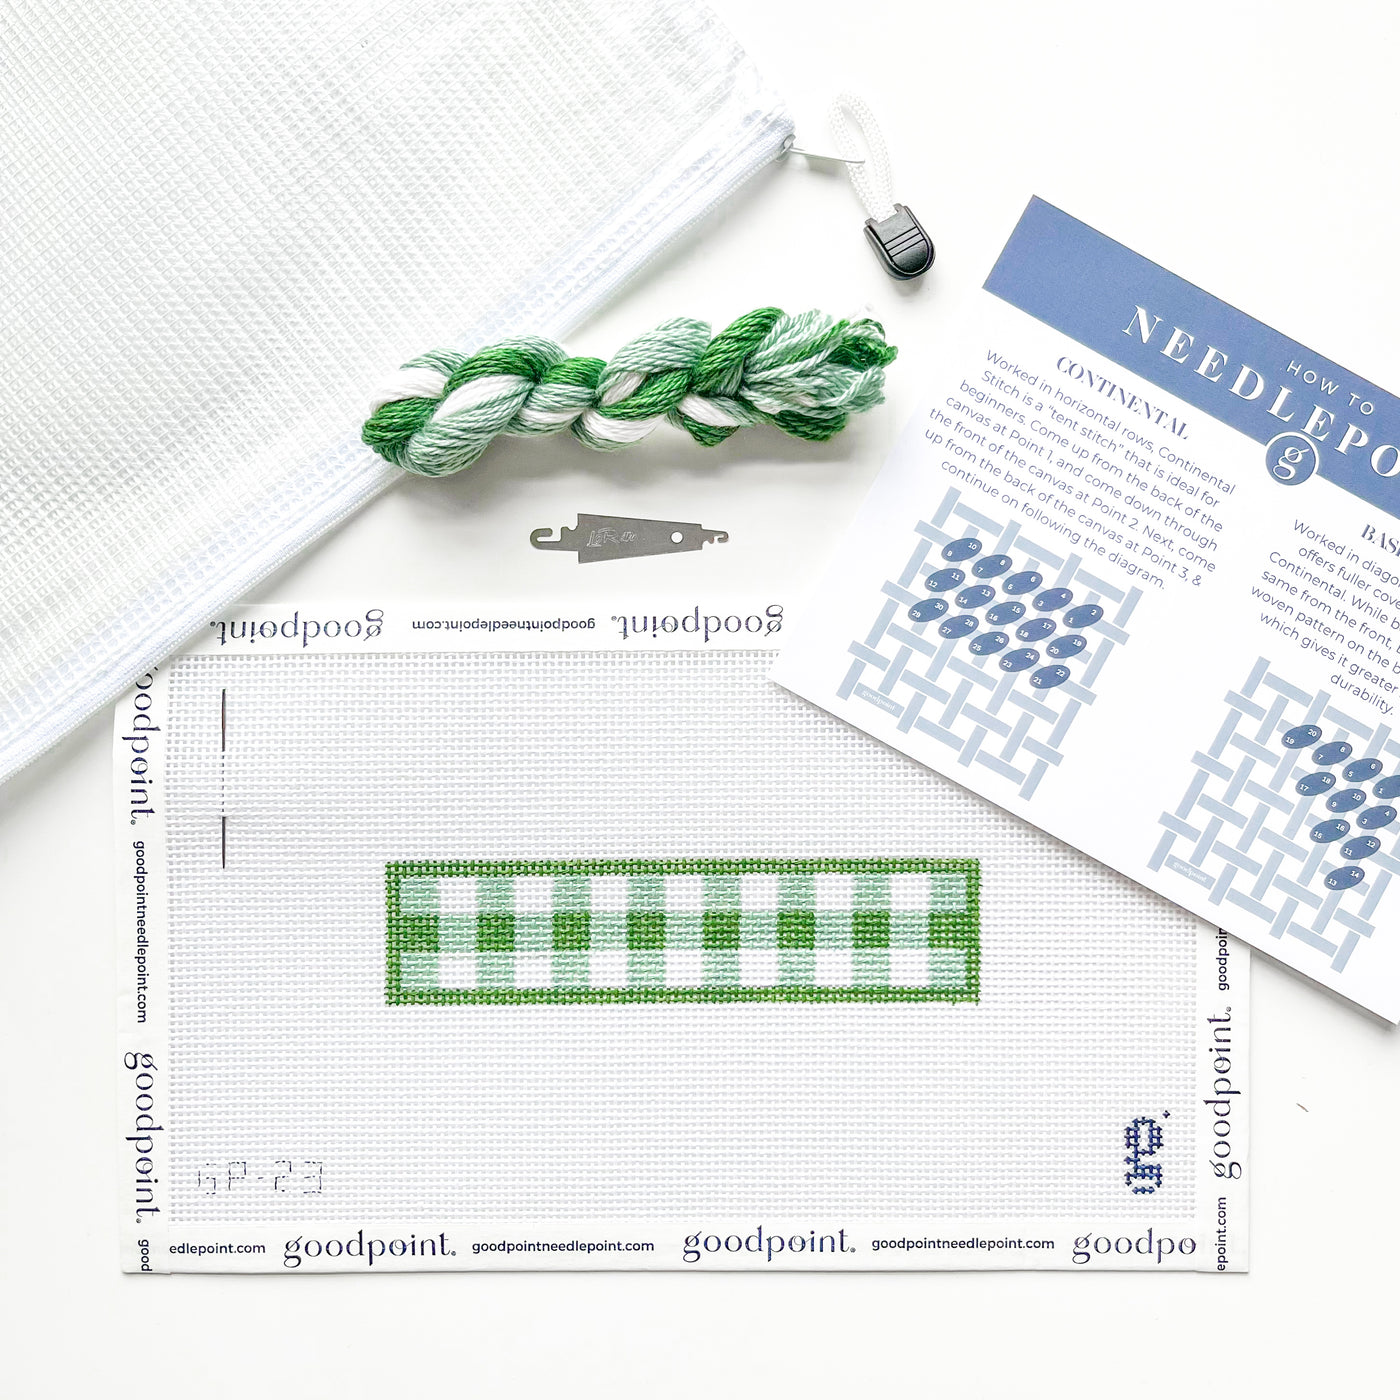 Green gingham key fob needlepoint canvas sits on white surface surrounded by needlepoint instructions, a needle threader, a bundle of threads and a white project bag